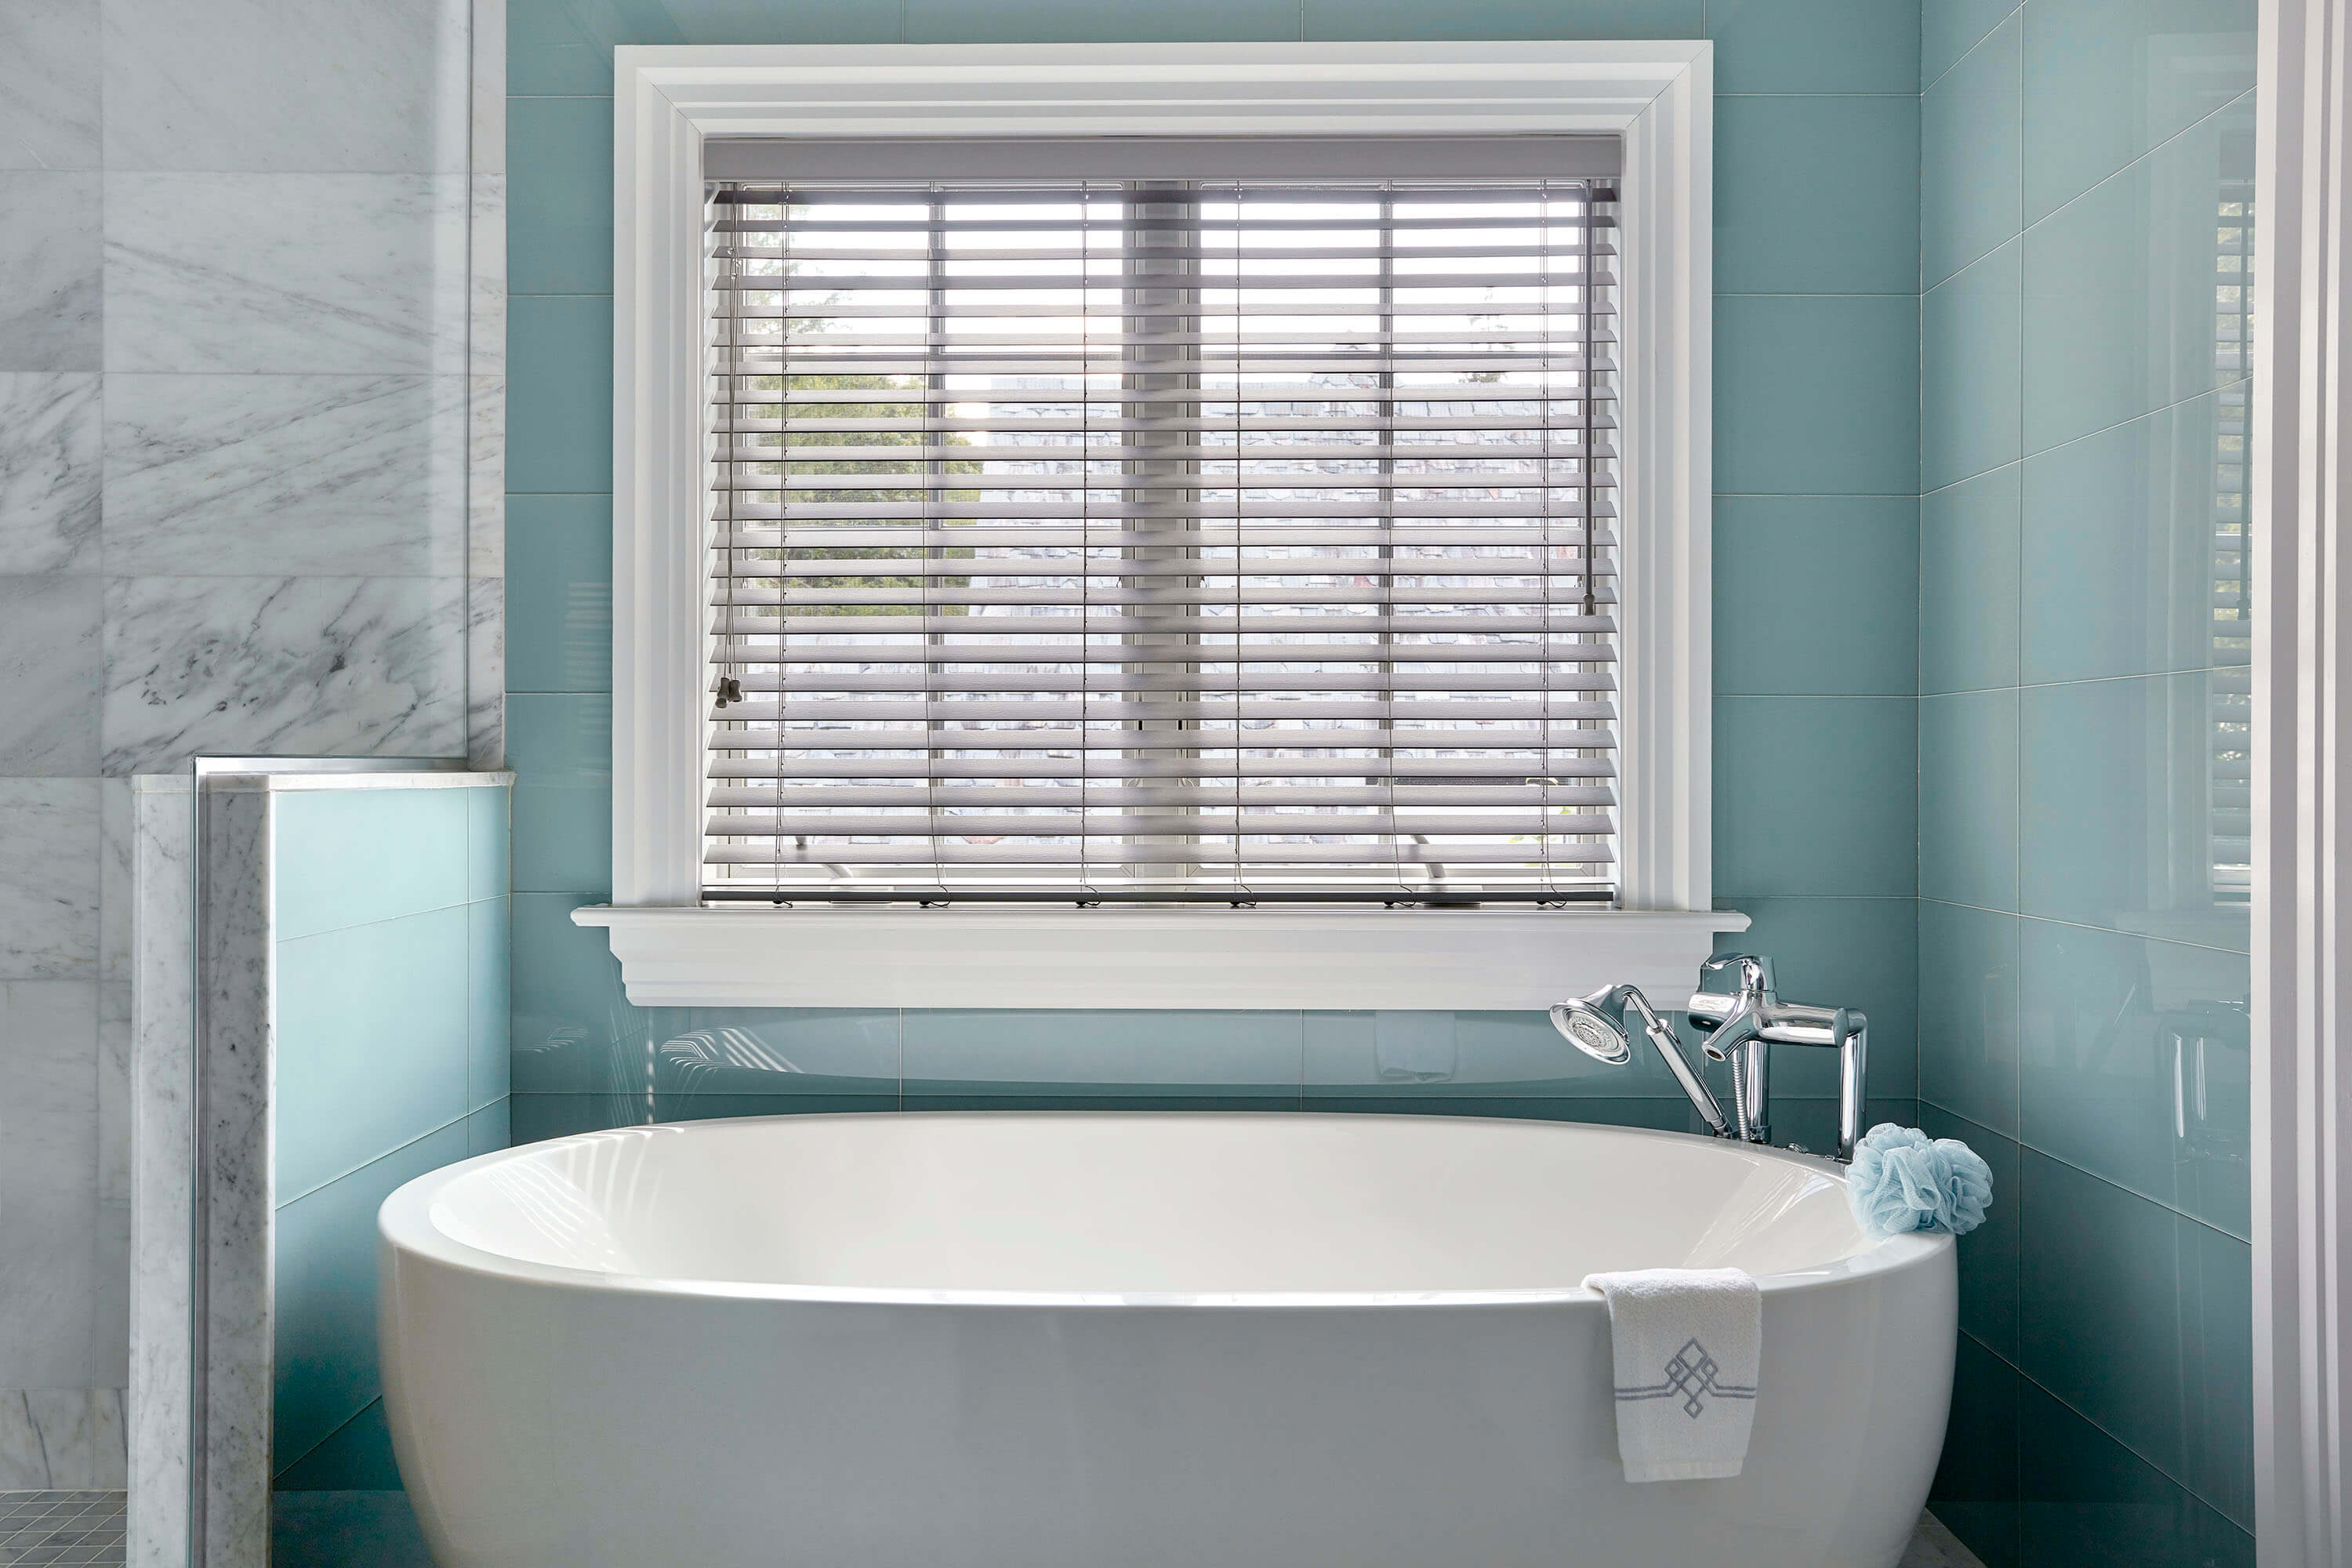 The modern bathroom features a large soaking tub, light grey cordless faux wood blinds, and blue and white tiles.